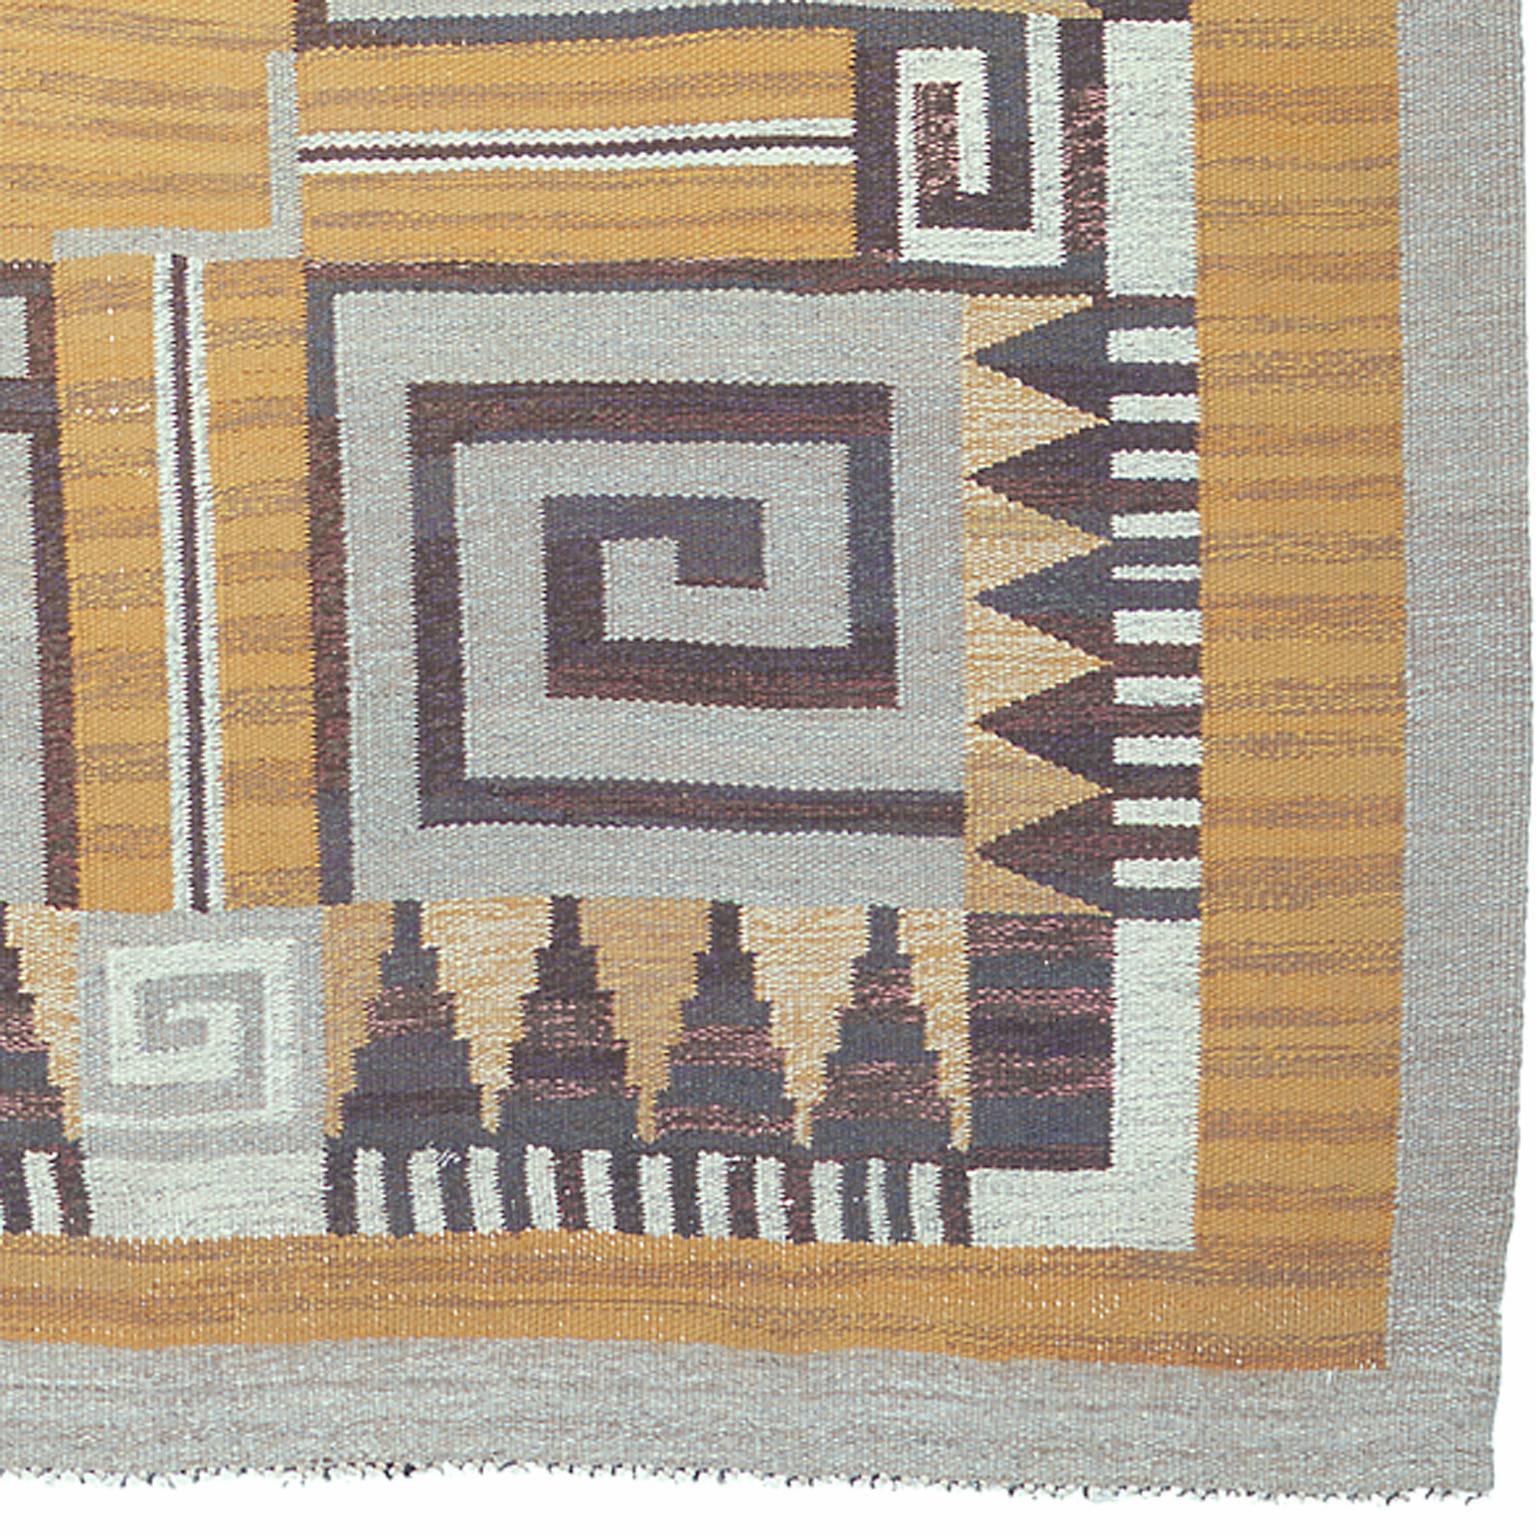 Mid-20th century Swedish flat-weave carpet. 
Provenance: The Ronneby Courthouse,
South-East Sweden.